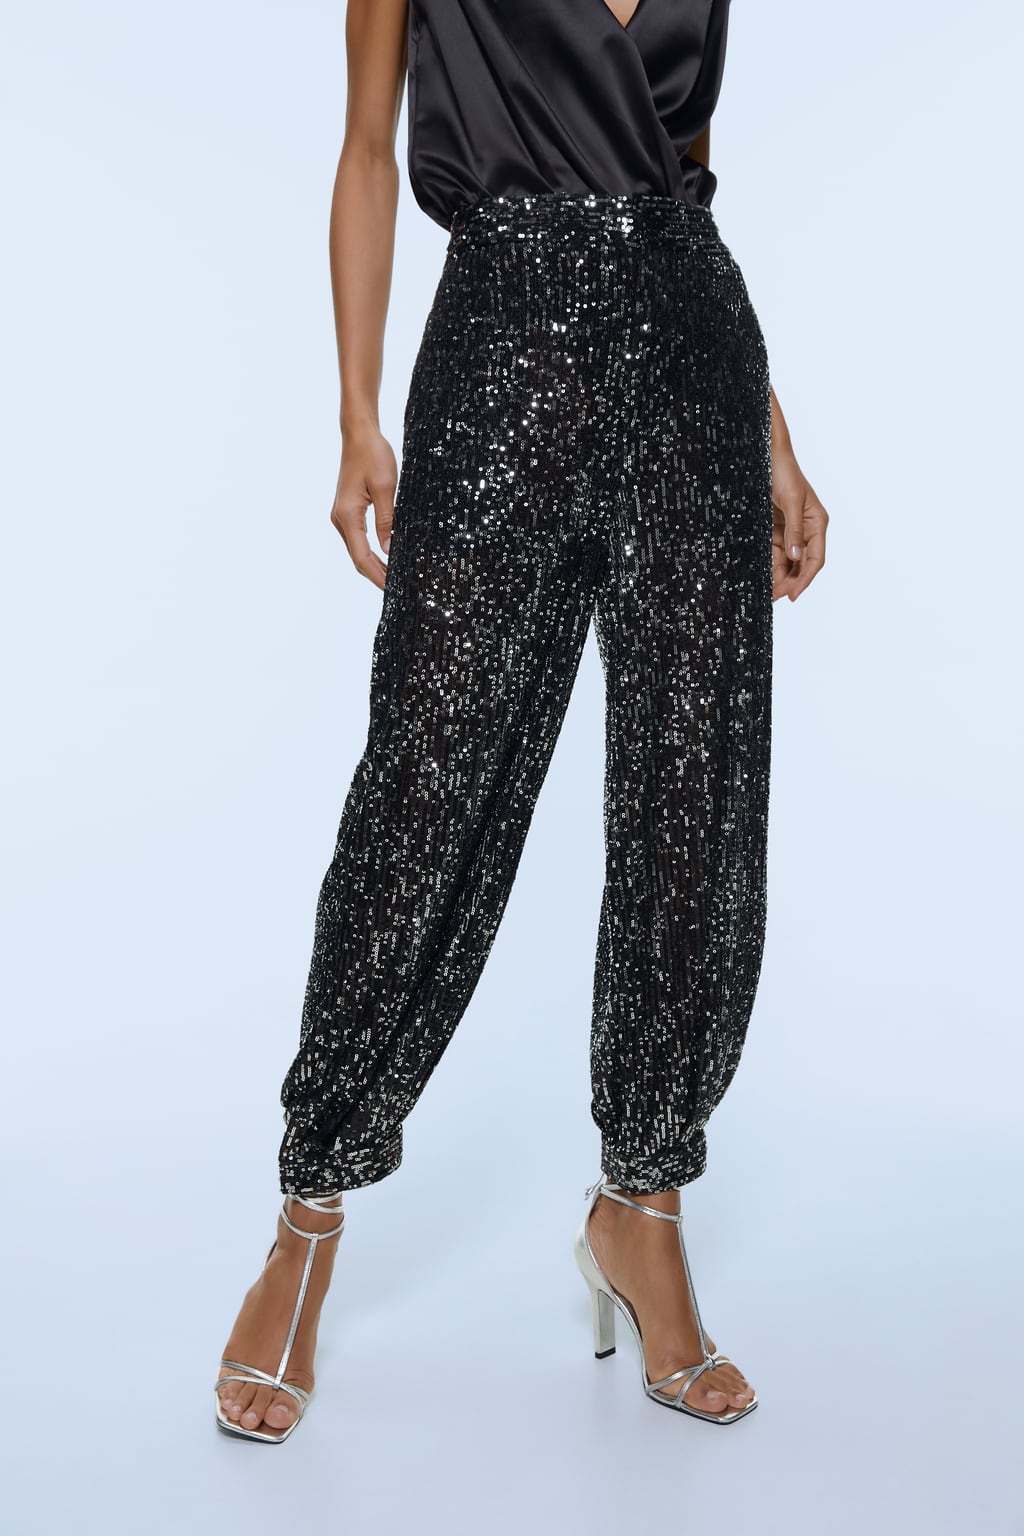 Image 2 of SEQUIN TROUSERS by Zara